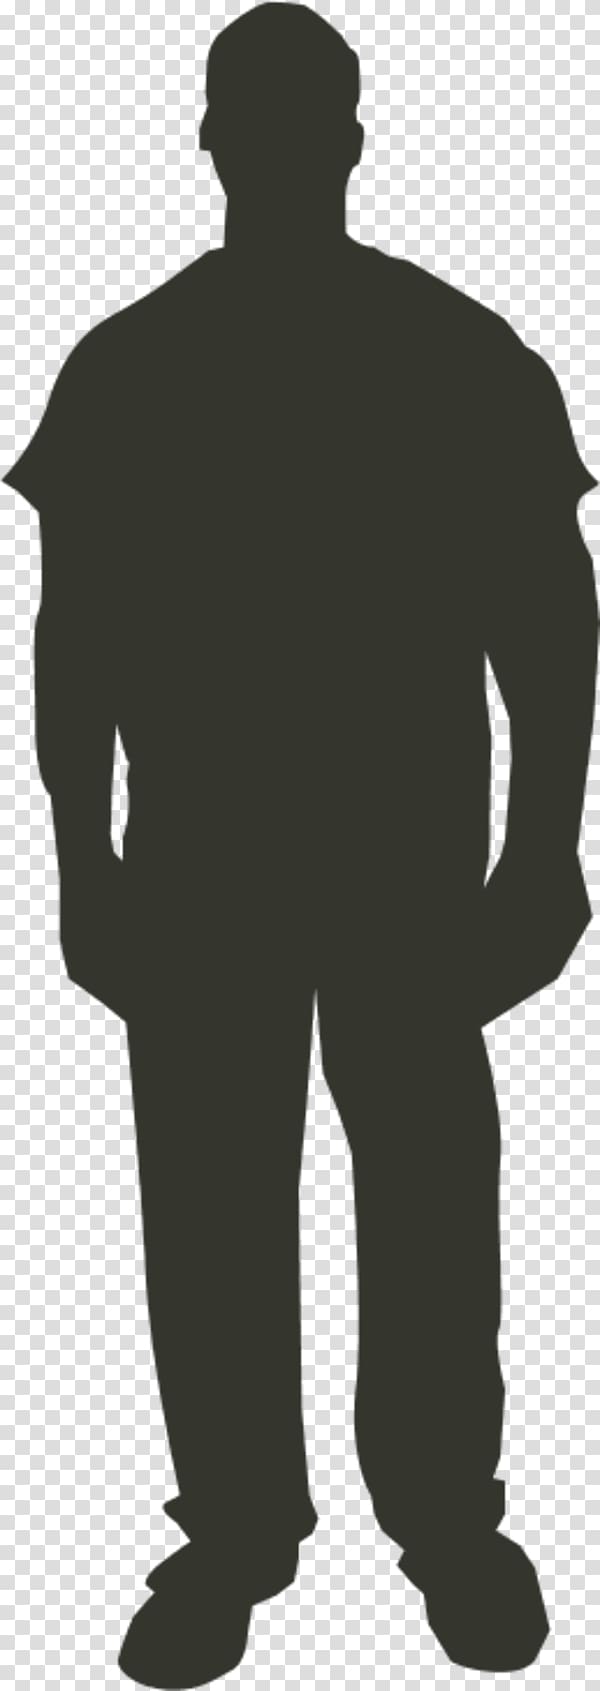 Silhouette of man, Person Outline , Man Standing Silhouette transparent ...